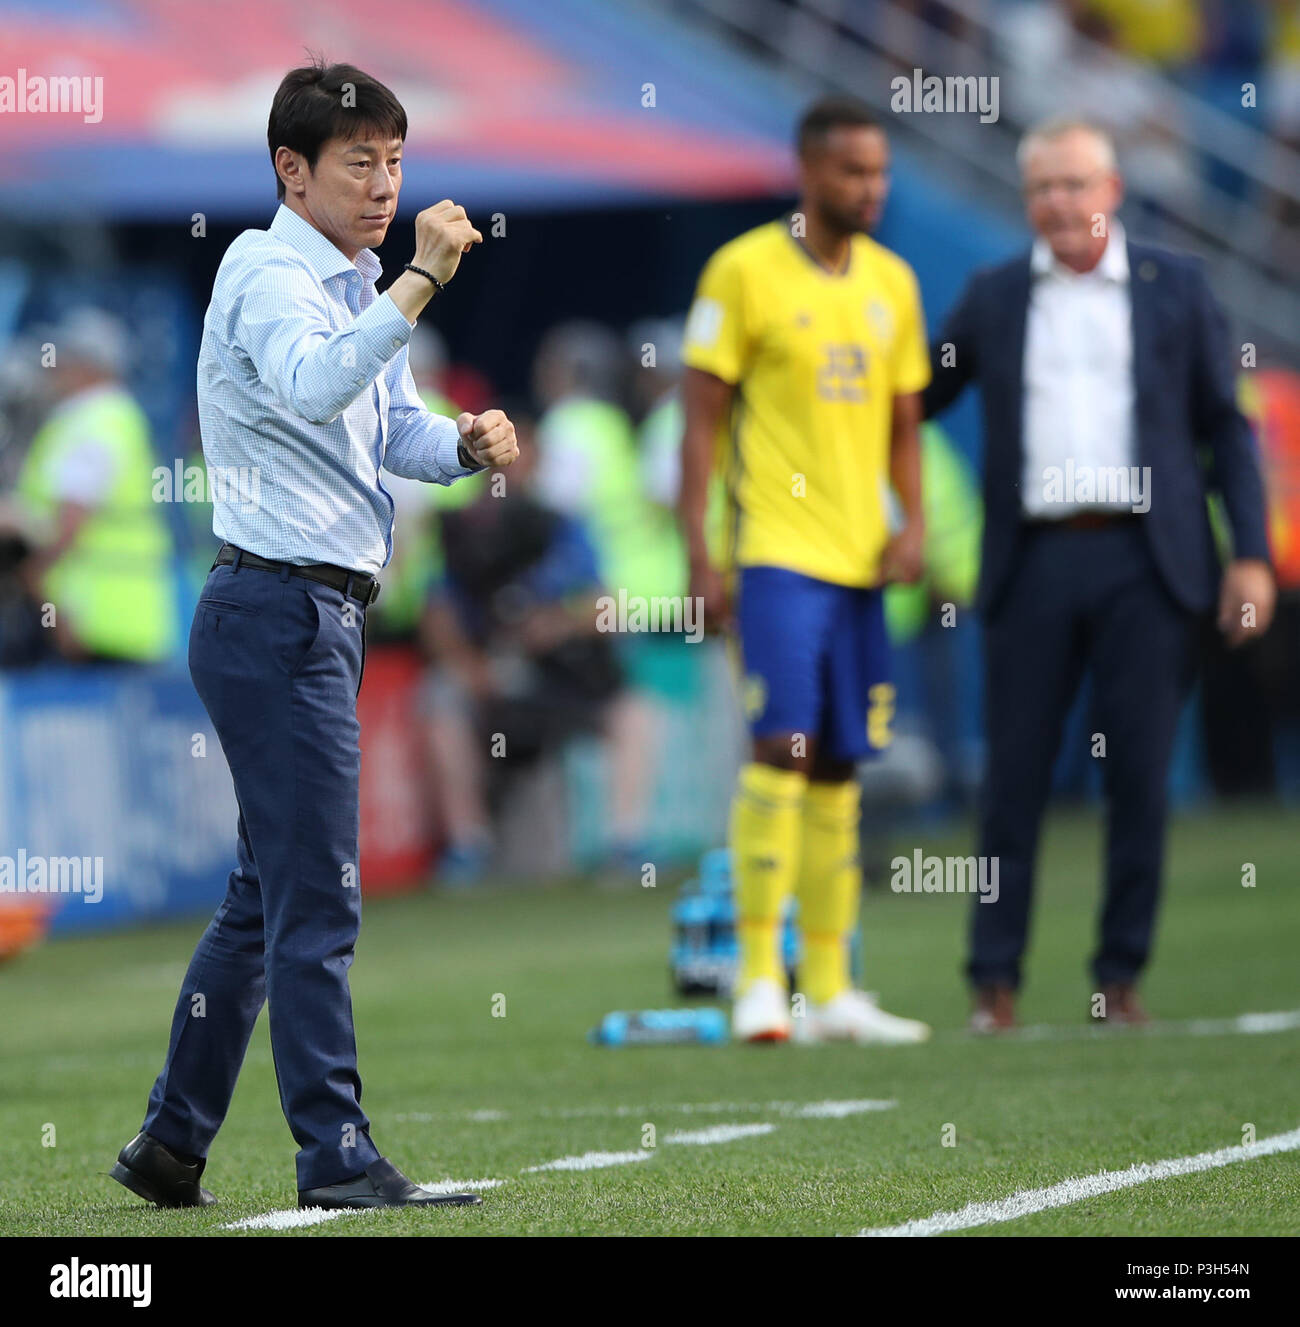 Nizhny Novgorod, Russia. 18th June, 2018. Head coach Shin Tae-yong of South Korea reacts during a group F match between Sweden and South Korea at the 2018 FIFA World Cup in Nizhny Novgorod, Russia, June 18, 2018. Sweden won 1-0. Credit: Wu Zhuang/Xinhua/Alamy Live News Stock Photo